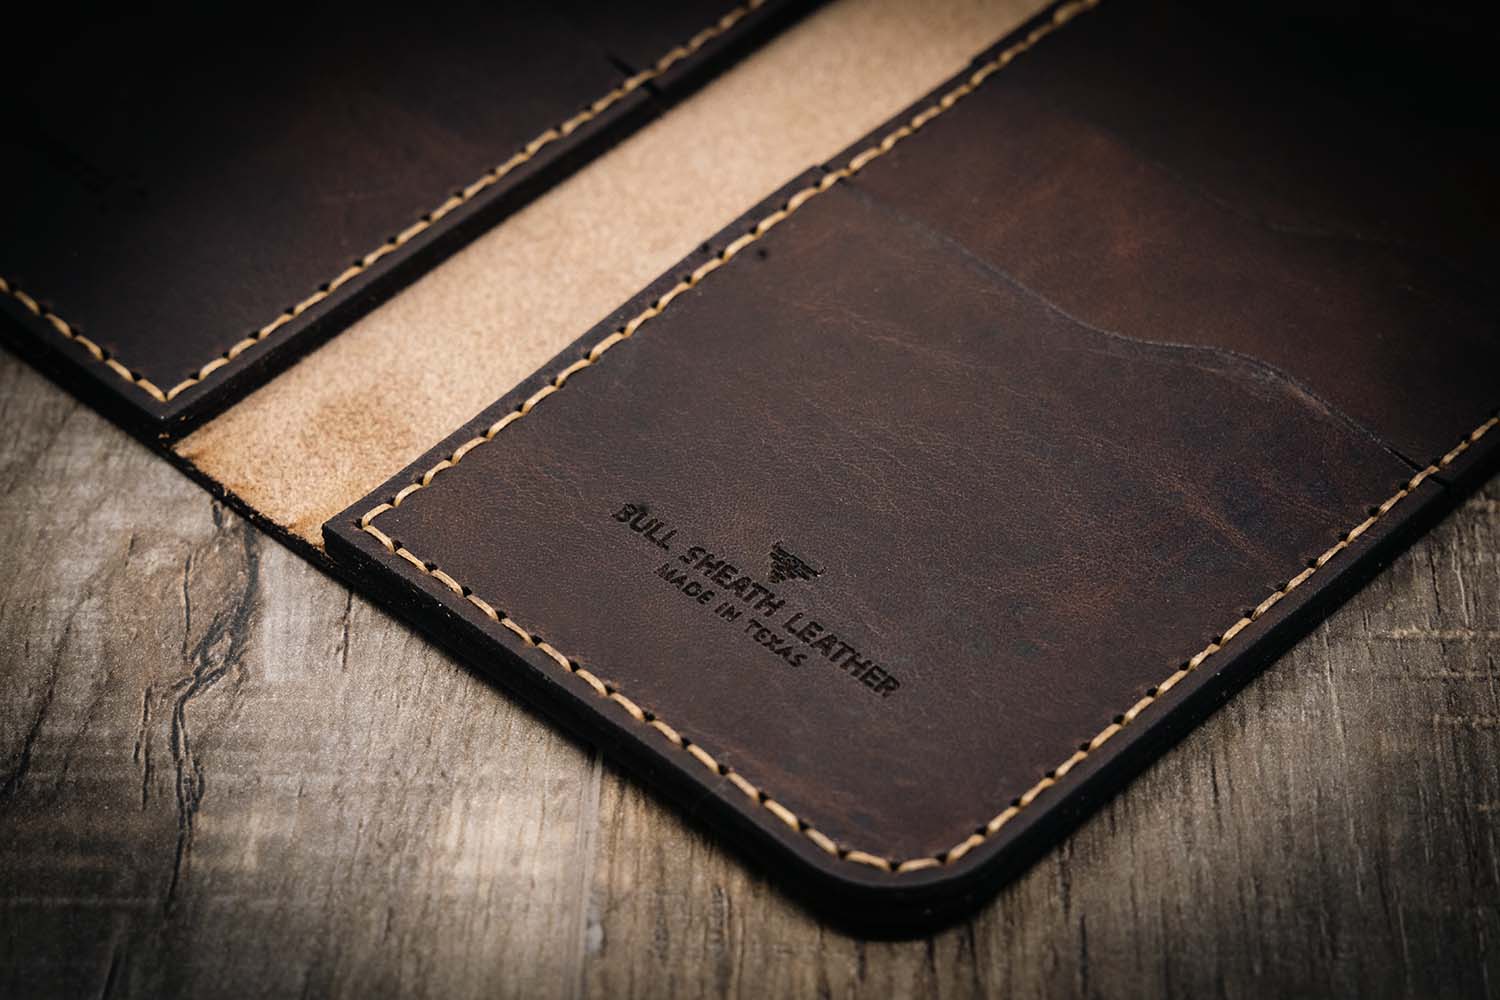 What Sets Men's Long Wallets Apart From the Rest? – Bull Sheath Leather